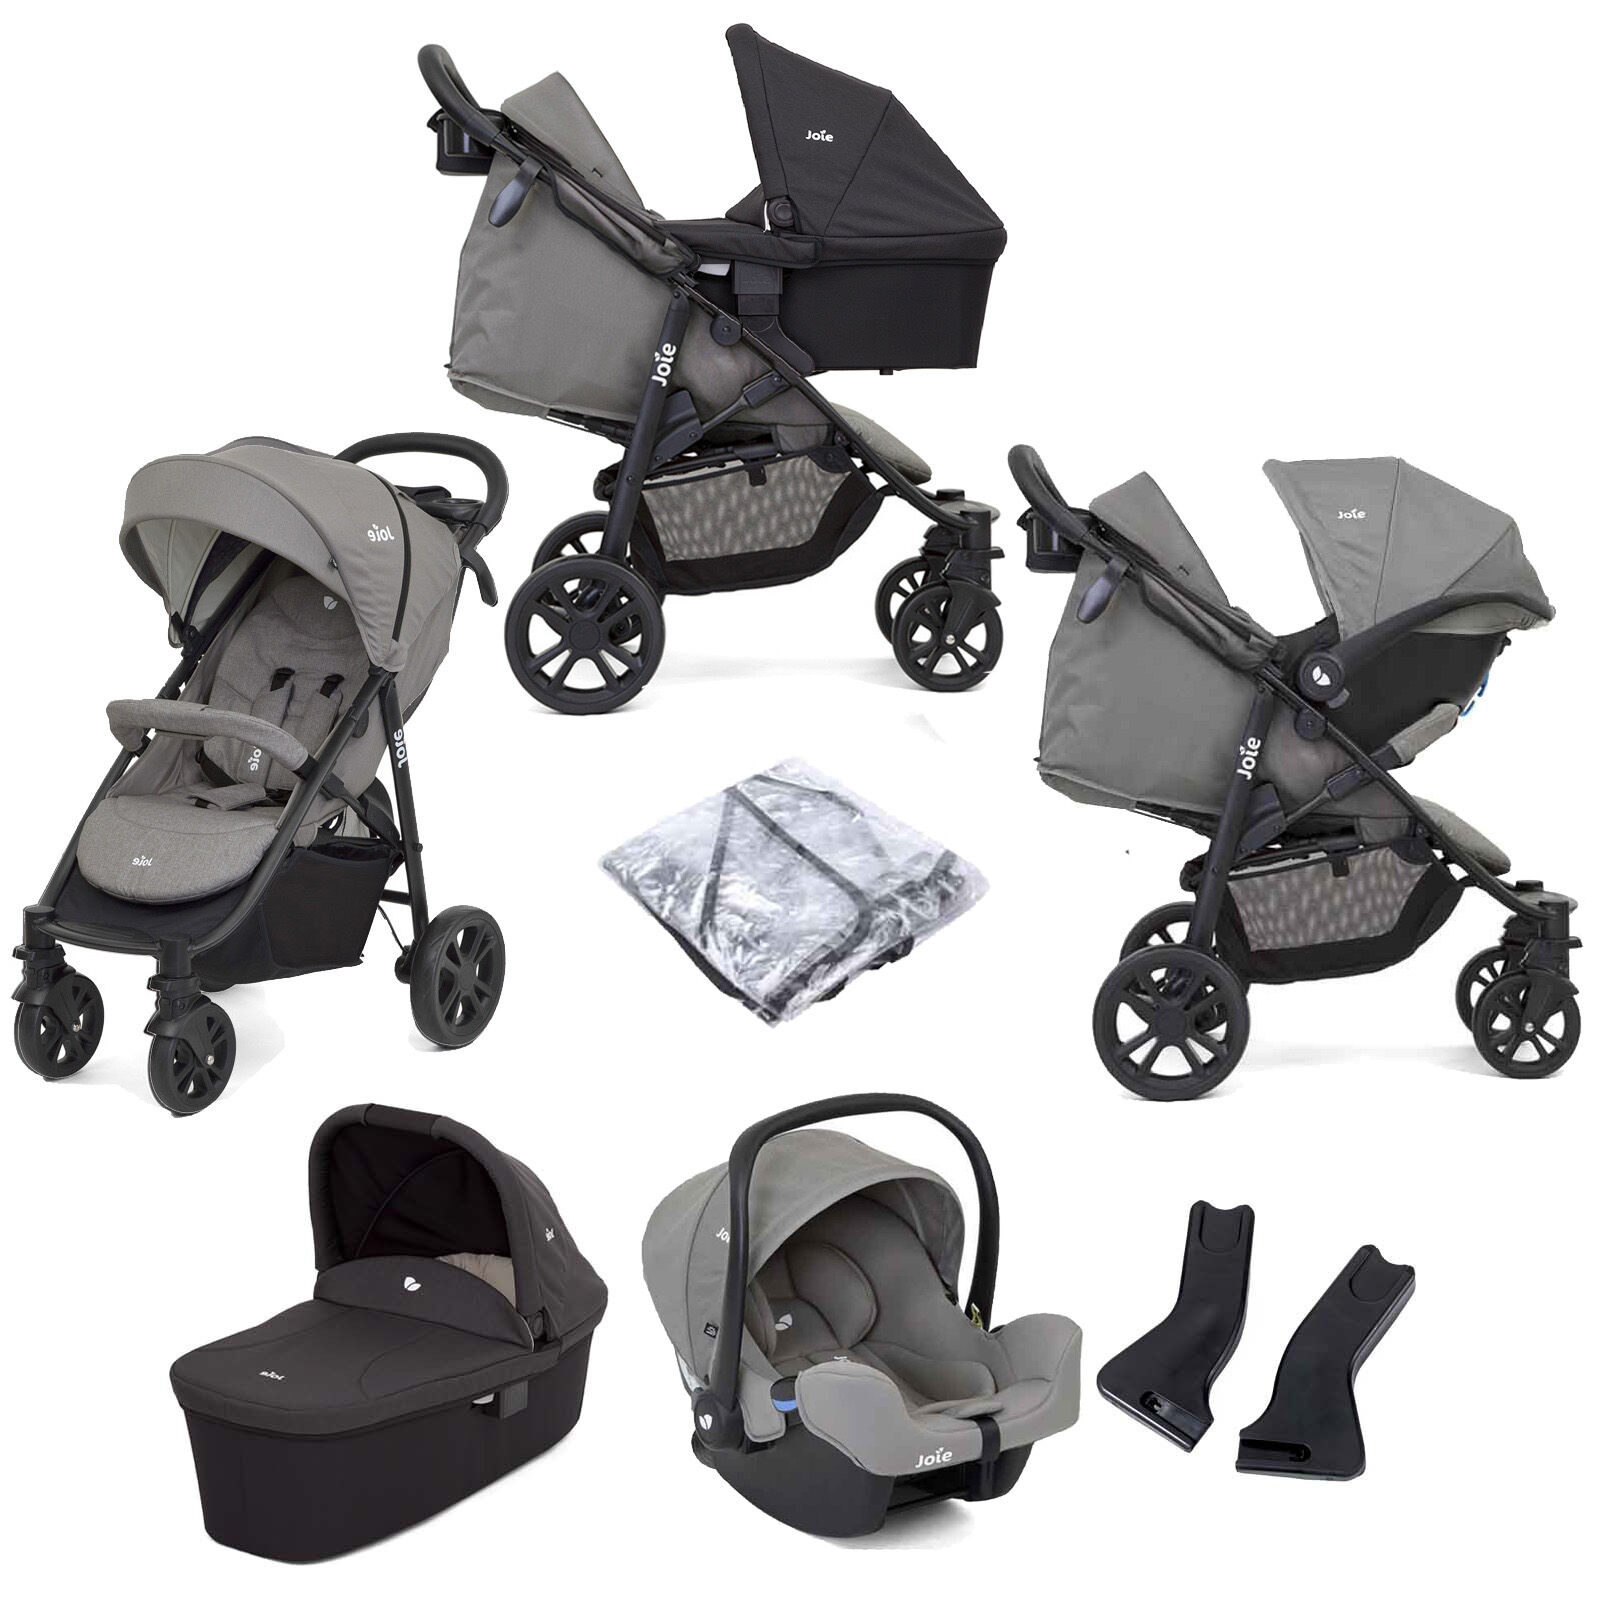 Joie Litetrax 4 Wheel (i-Snug) Travel System with Carrycot - Grey Flannel